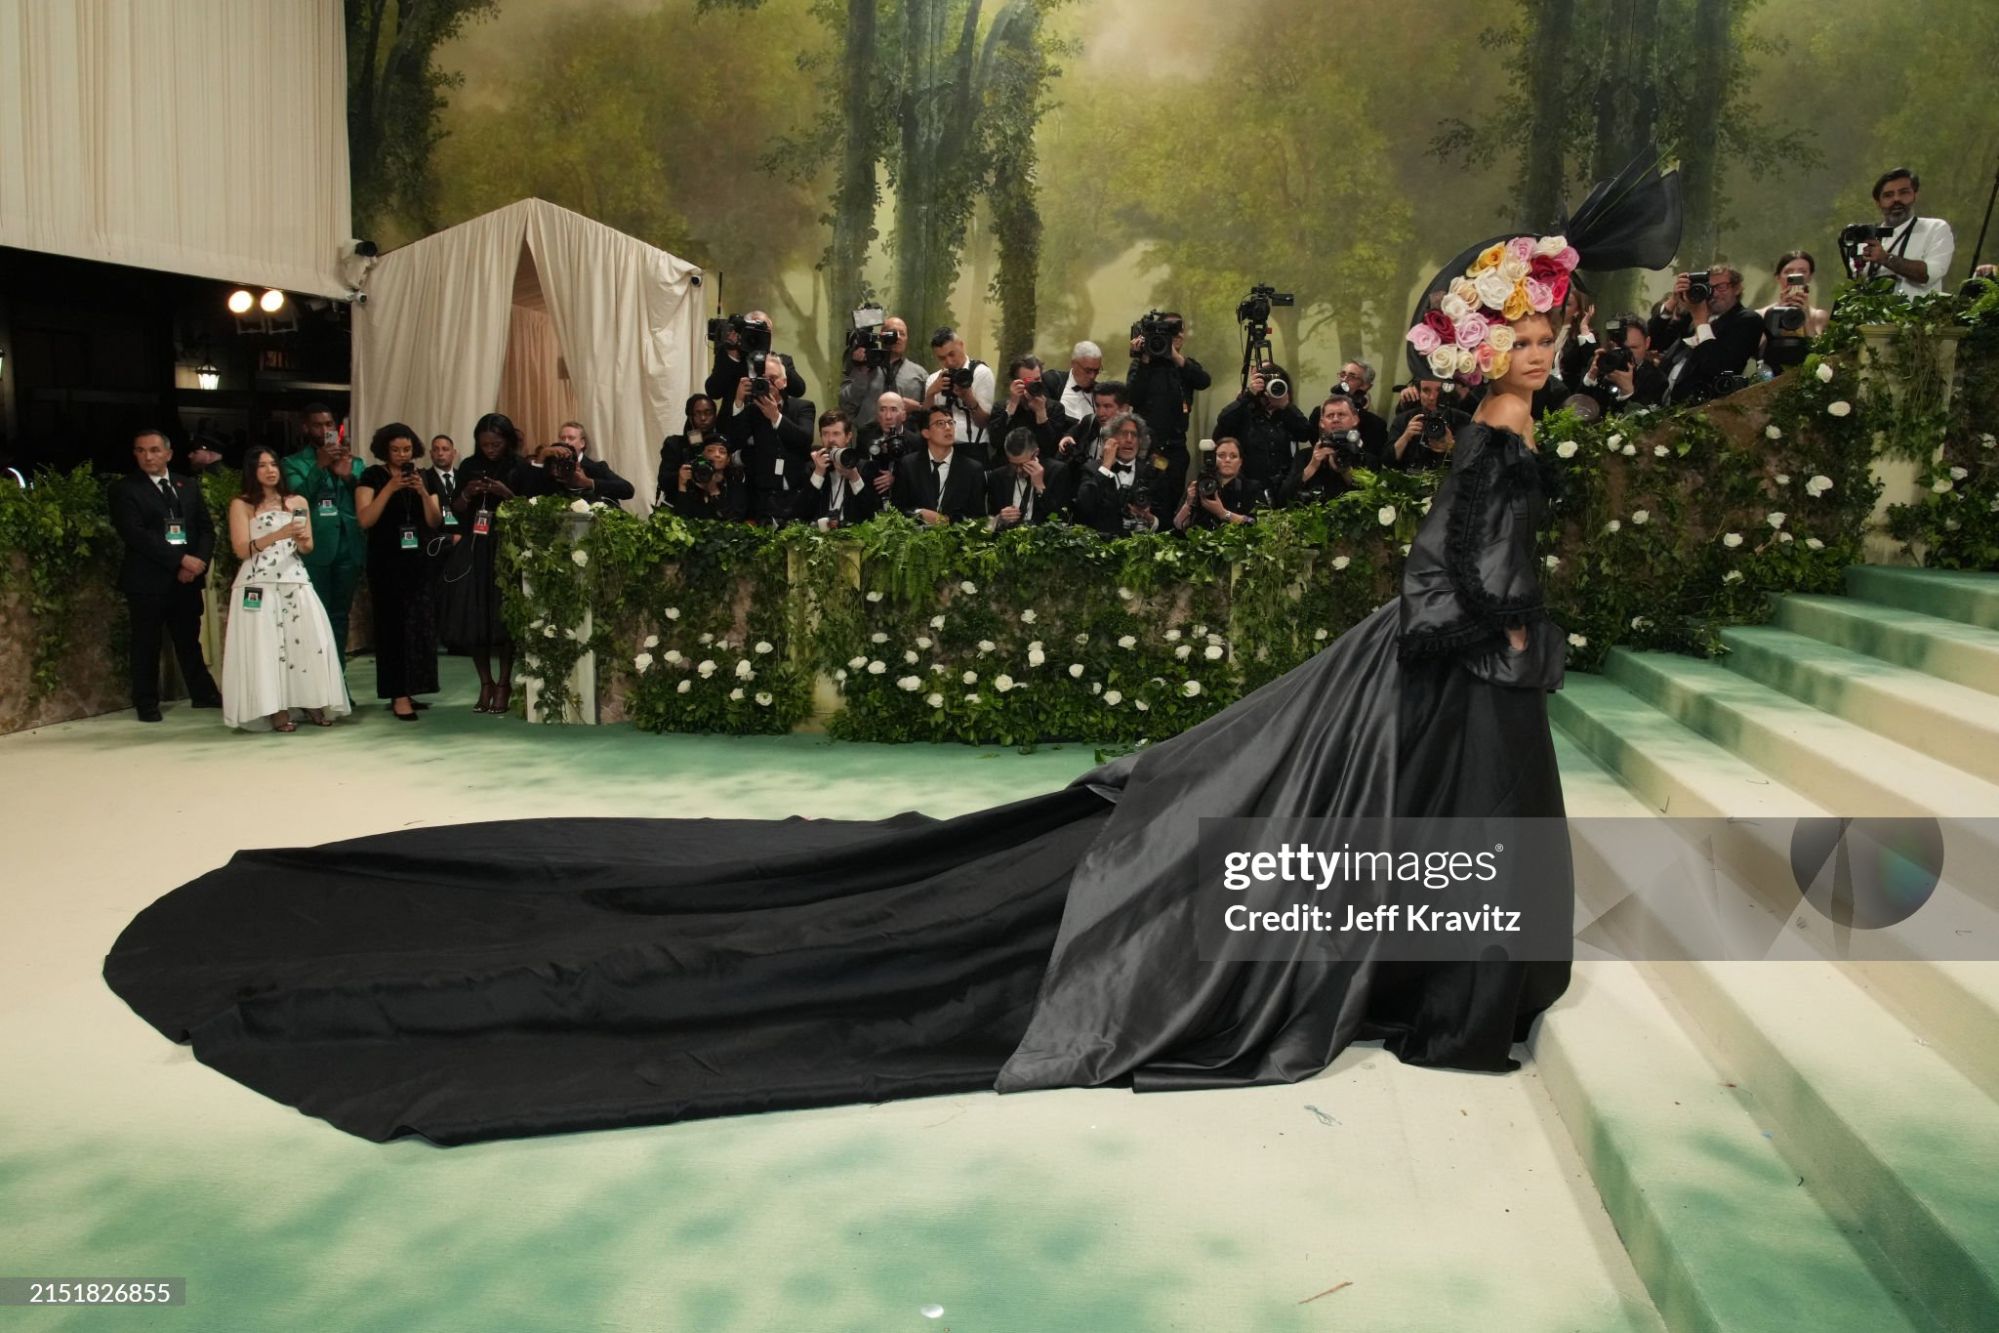 gettyimages-2151826855-2048x2048.jpg